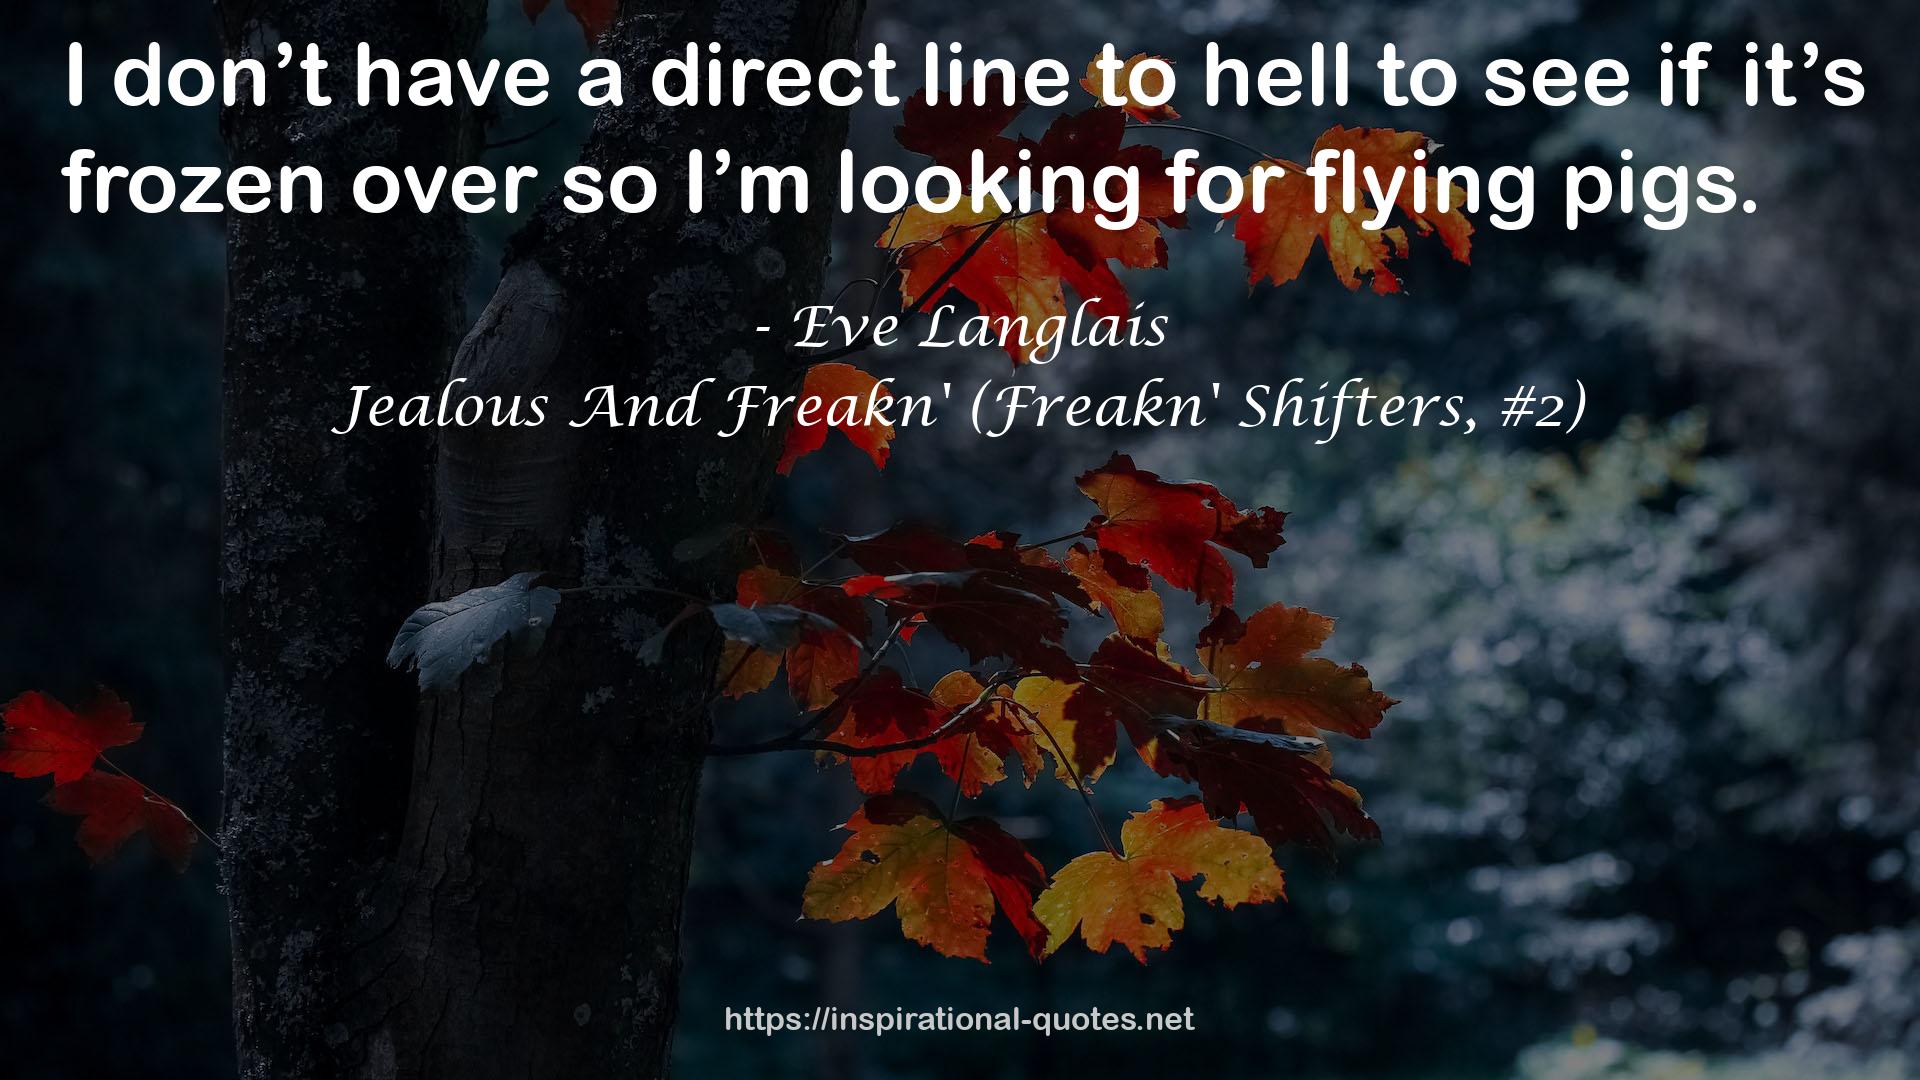 Jealous And Freakn' (Freakn' Shifters, #2) QUOTES